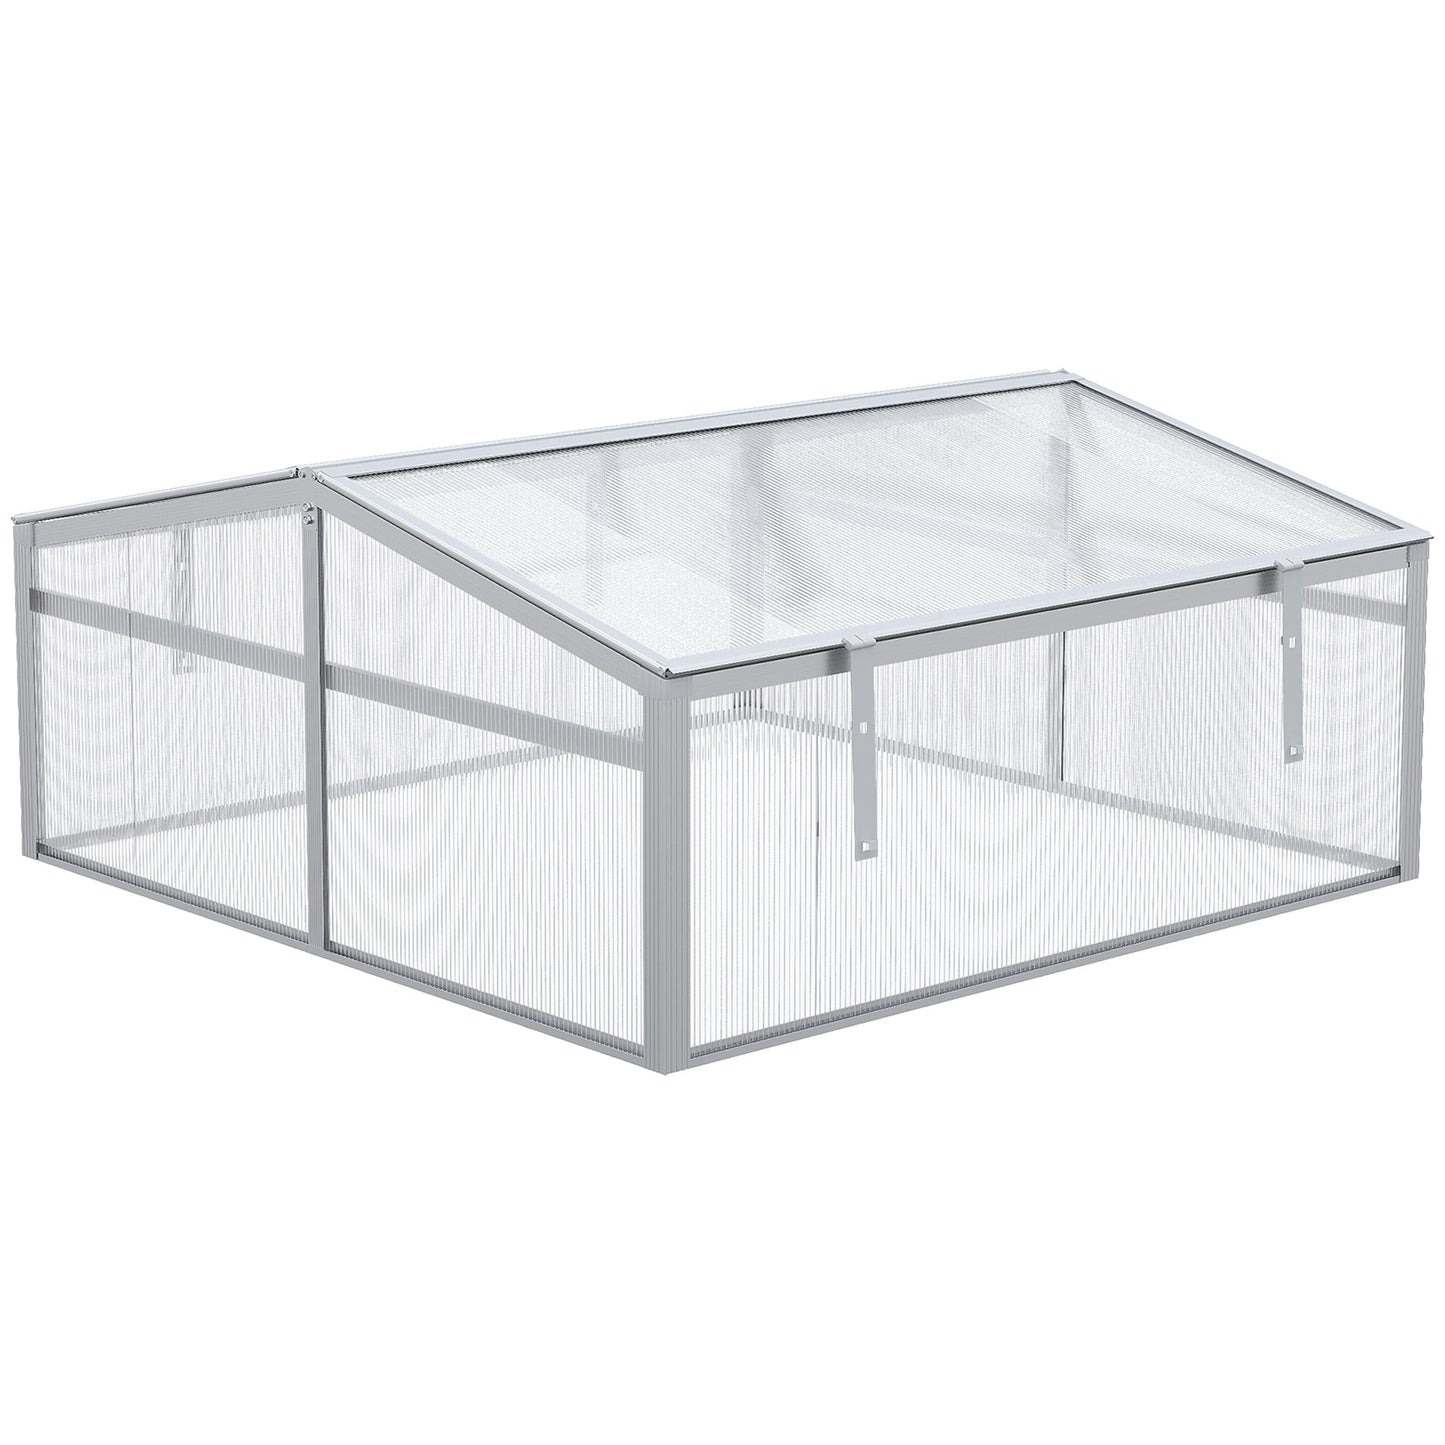 Miscellaneous-39" Aluminum Vented Cold Frame Mini Greenhouse Kit with Adjustable Roof, Polycarbonate Panels, & Strong Design - Outdoor Style Company